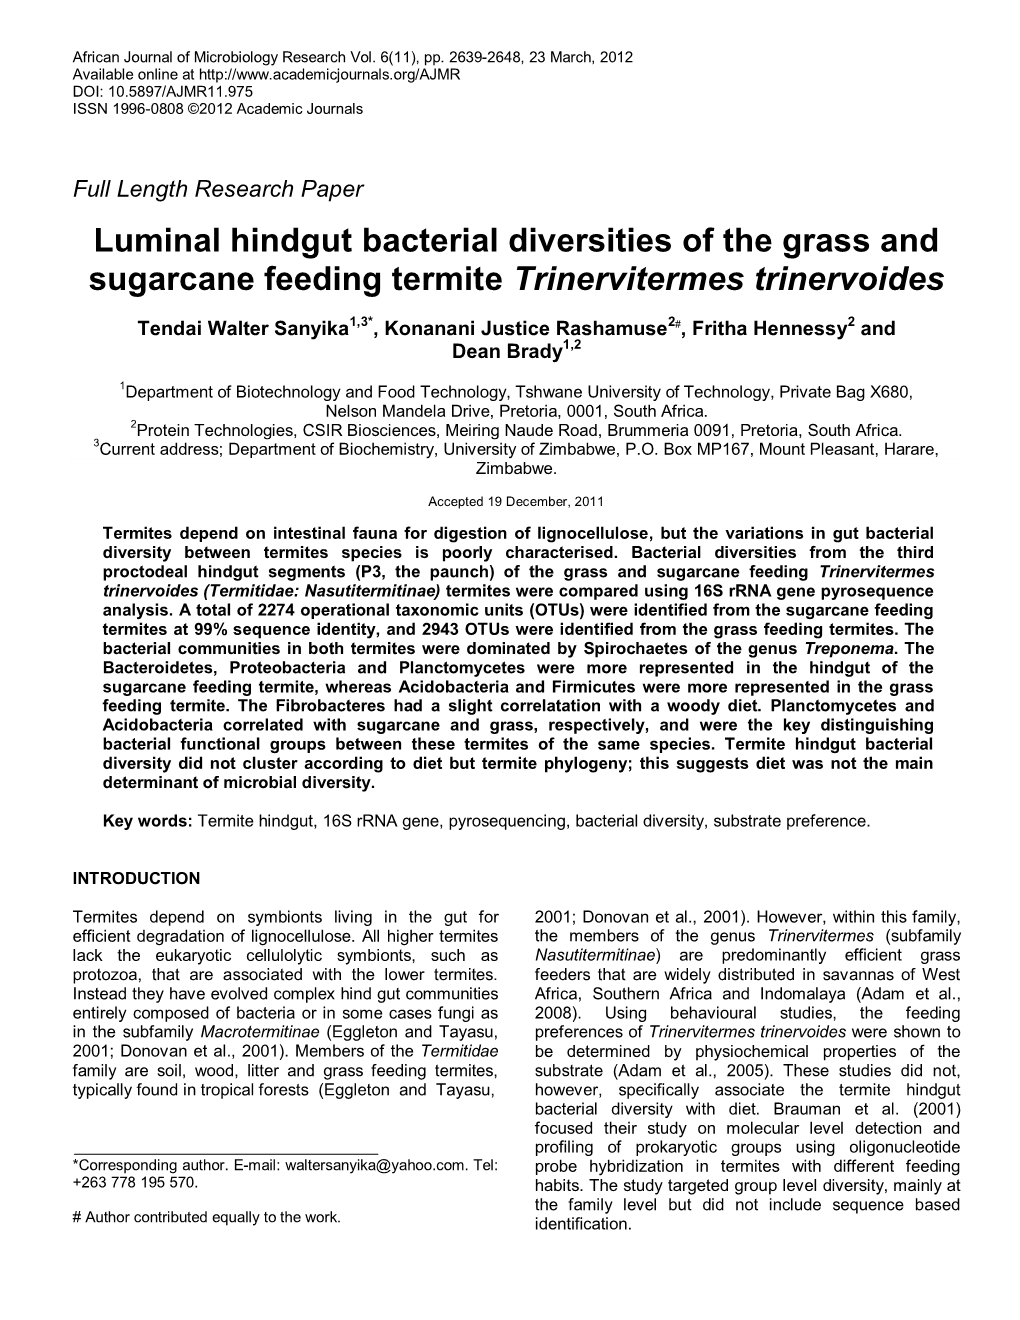 Luminal Hindgut Bacterial Diversities of the Grass and Sugarcane Feeding Termite Trinervitermes Trinervoides